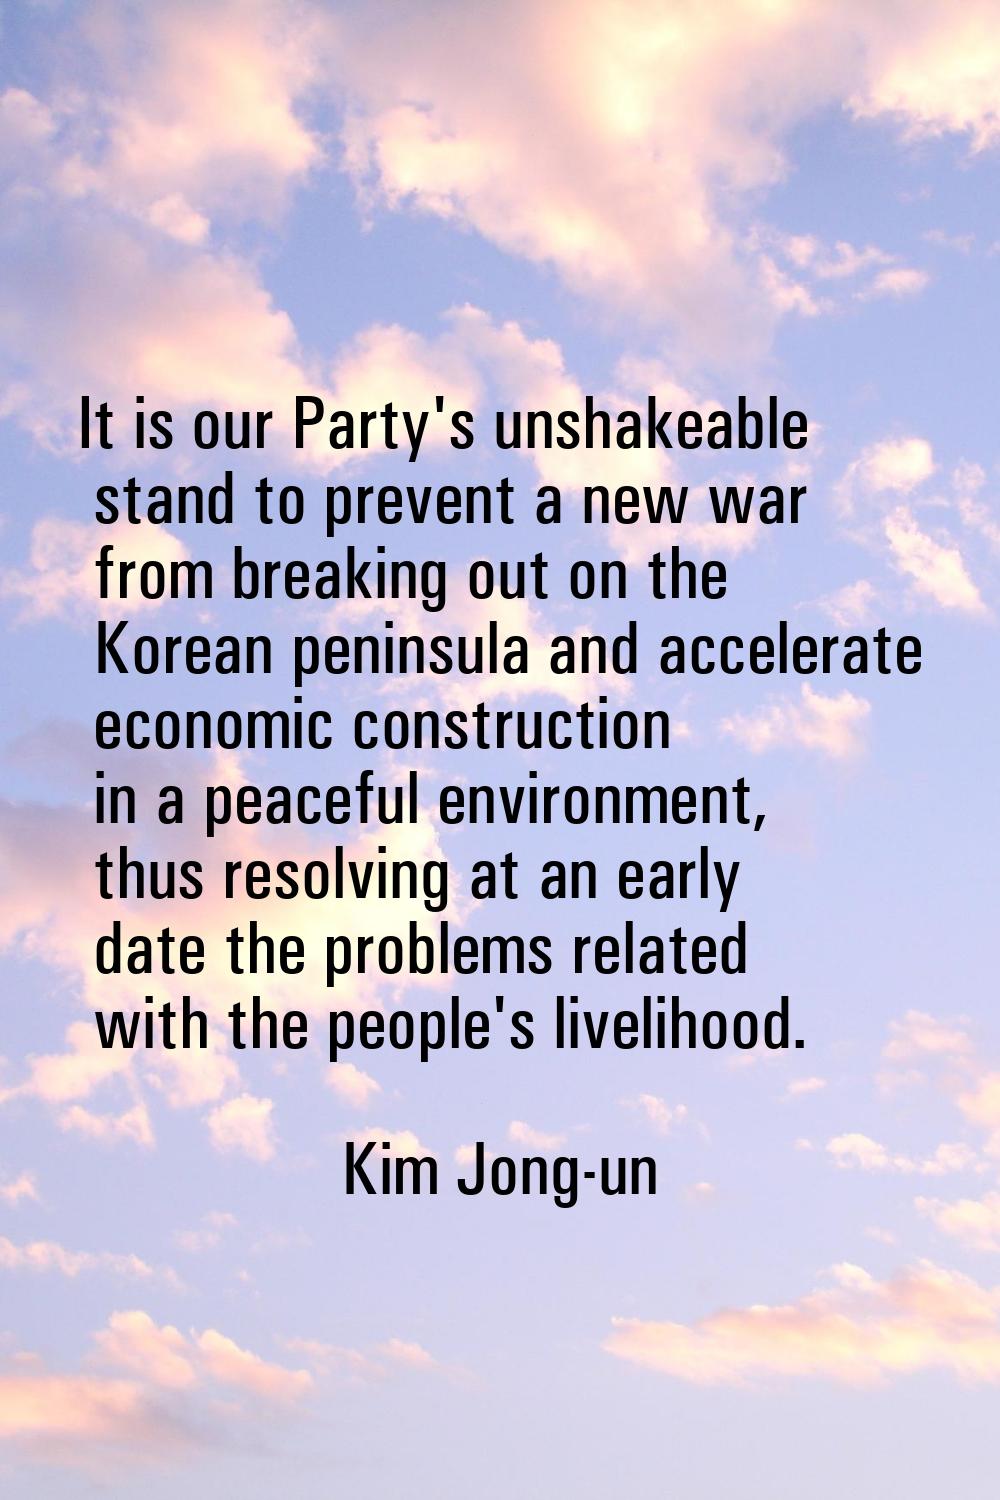 It is our Party's unshakeable stand to prevent a new war from breaking out on the Korean peninsula 